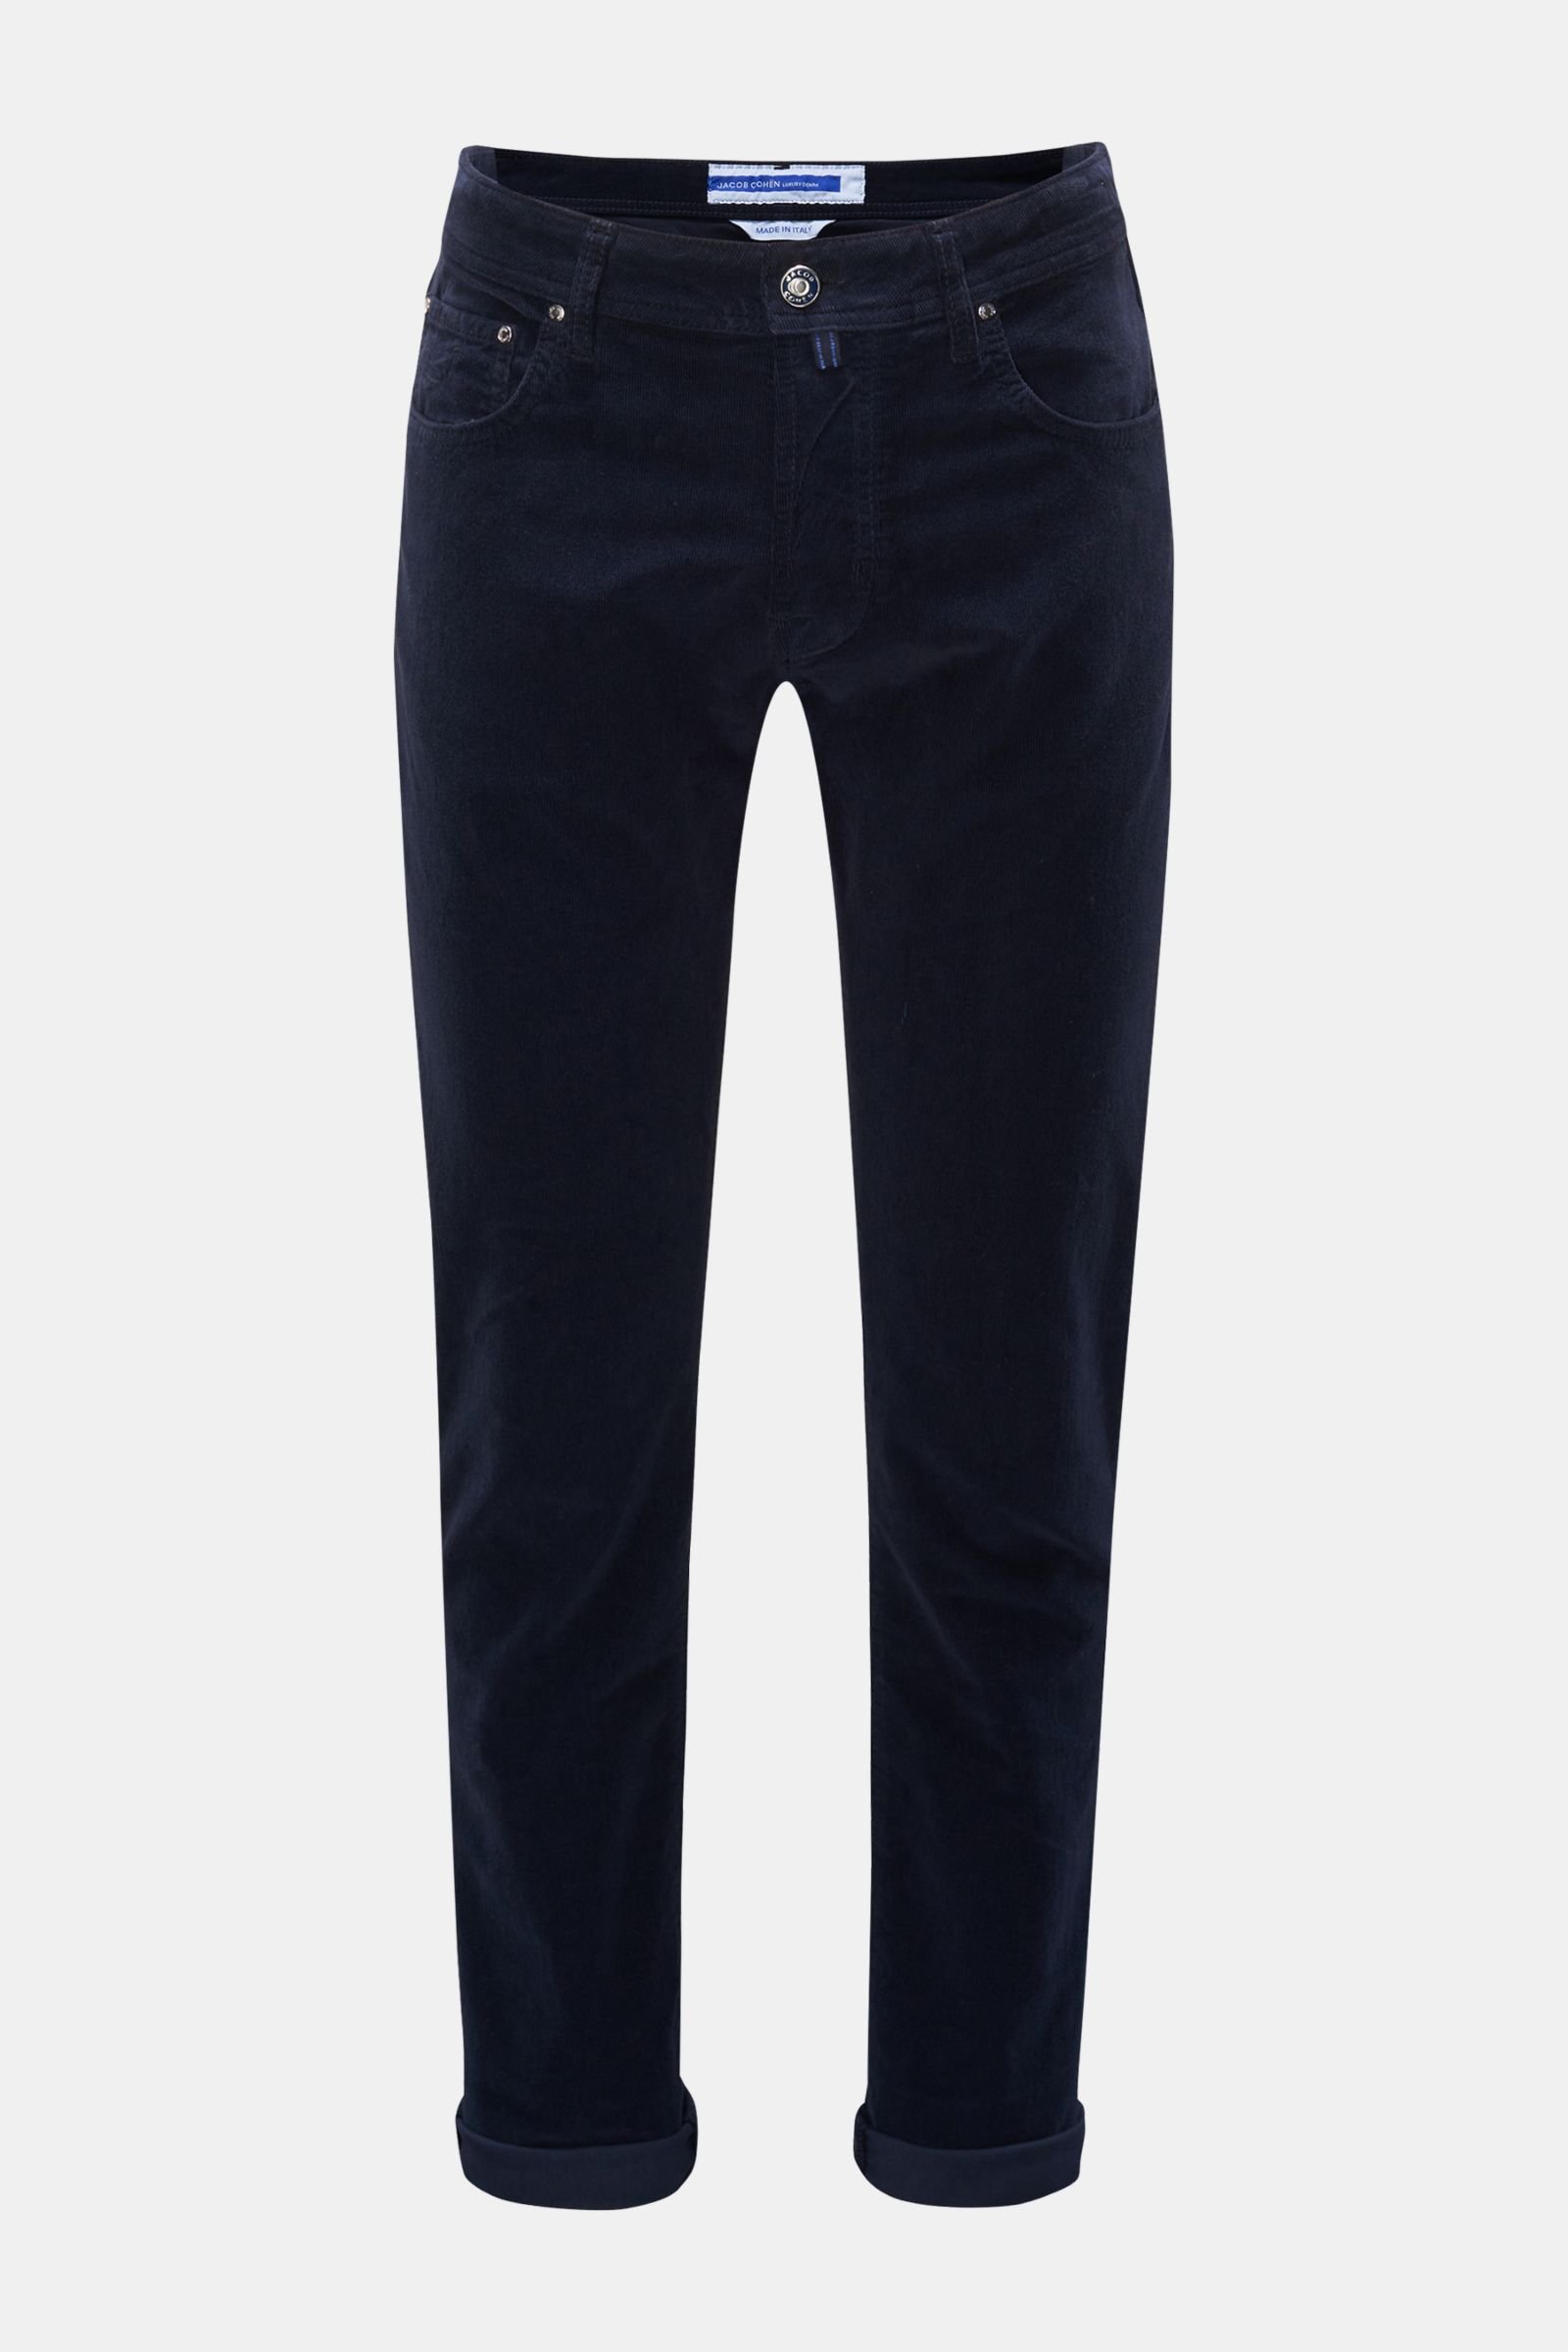 Corduroy trousers 'Bard' navy (formerly J688)